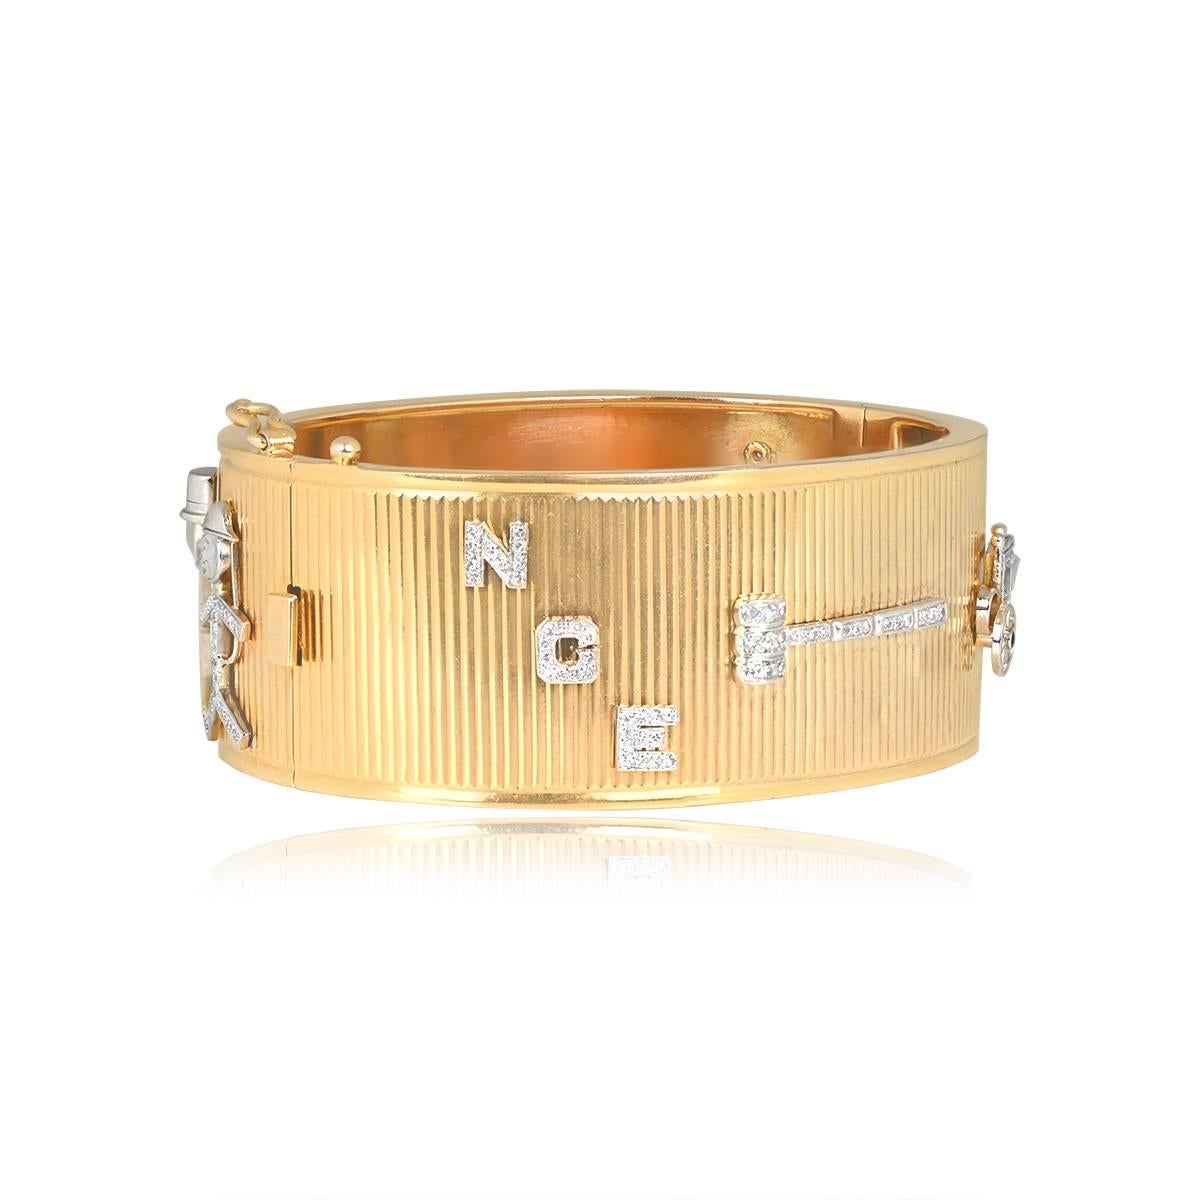 A Retro-era bracelet with a 14k yellow gold bangle and platinum Art Deco charms adorned with single-cut diamonds. Charms include the letters N G E, a judge’s gavel, a detailed carriage with emerald accents, a second gavel, a courthouse, a car, and